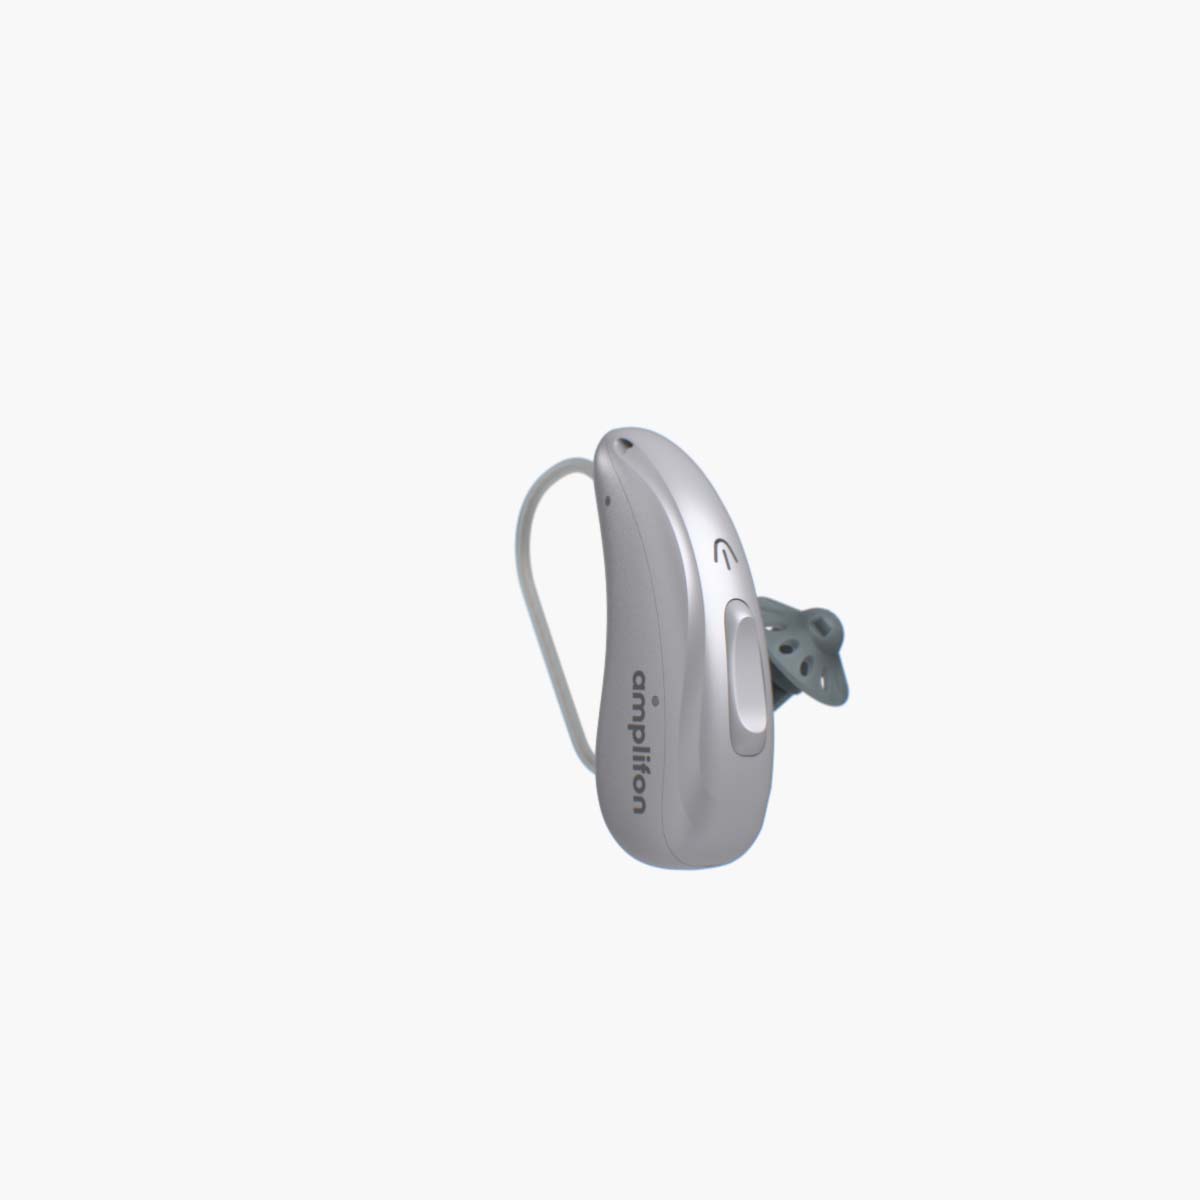 ampli-energy R AX - Rechargeable Hearing Aid